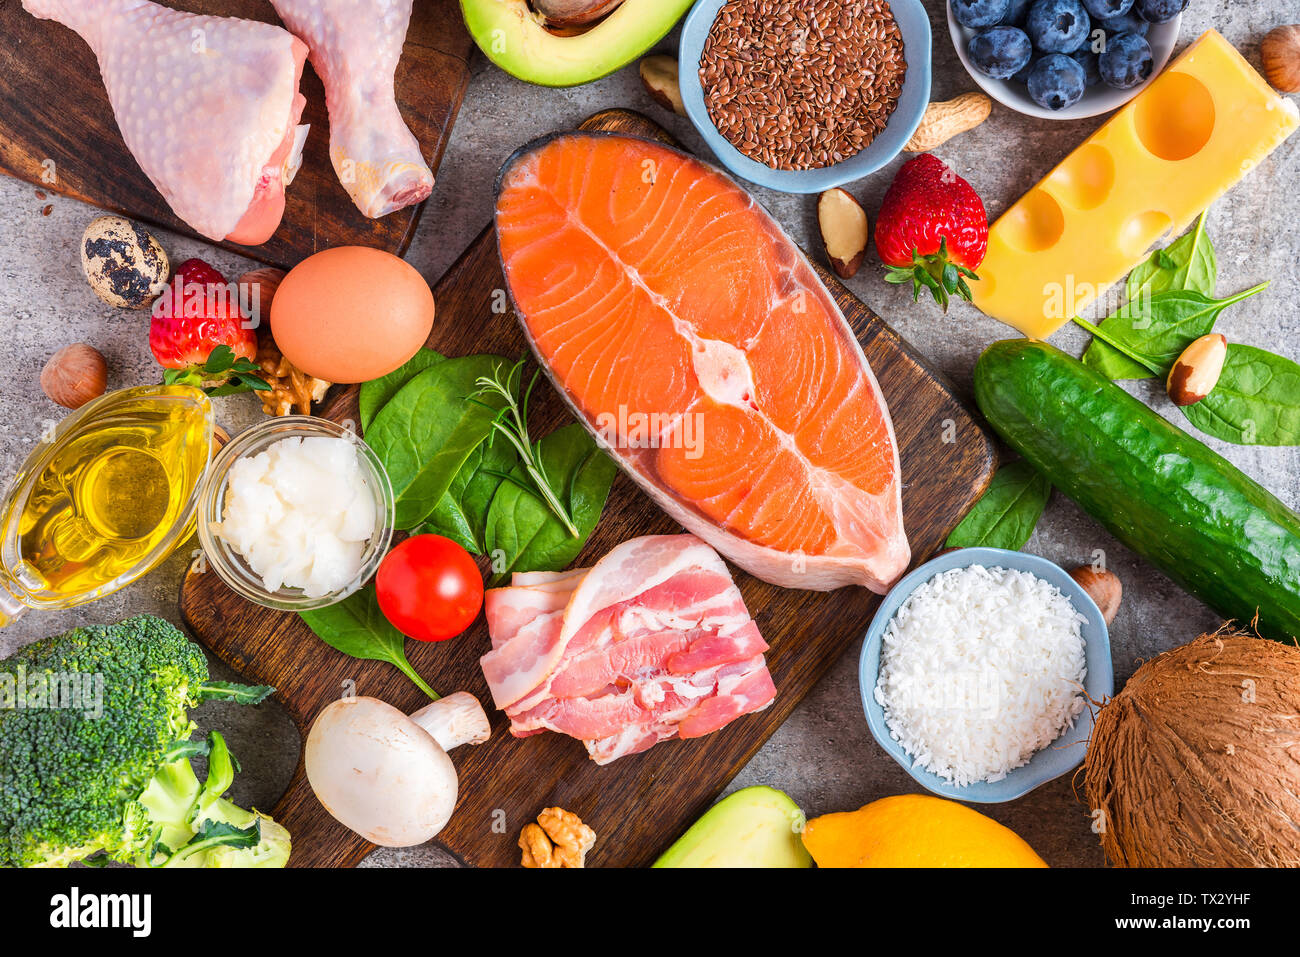 https://c8.alamy.com/comp/TX2YHF/keto-diet-concept-ketogenic-diet-food-balanced-low-carb-food-background-vegetables-fish-meat-cheese-nuts-seeds-on-wooden-background-top-view-TX2YHF.jpg